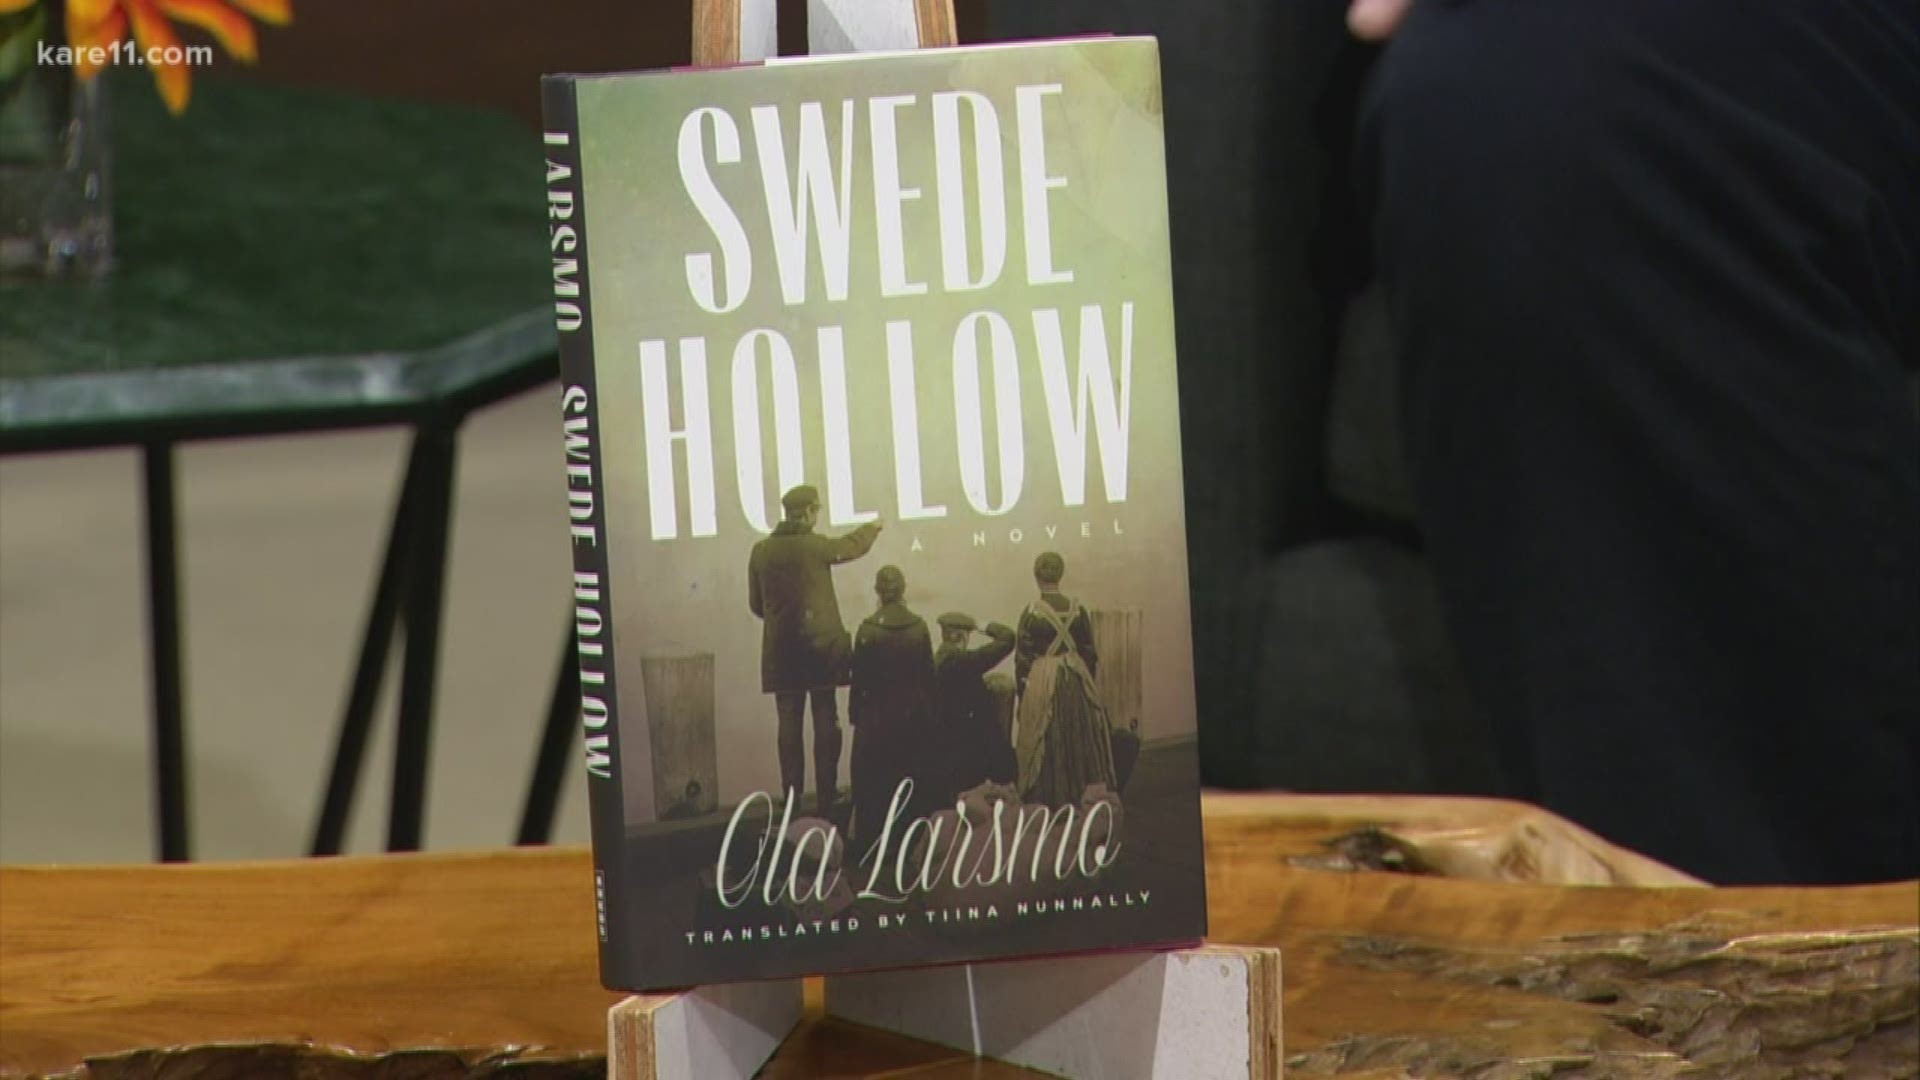 The book, Swede Hollow was released in Sweden a few years ago, but was just translated into English and is being released in the U.S.